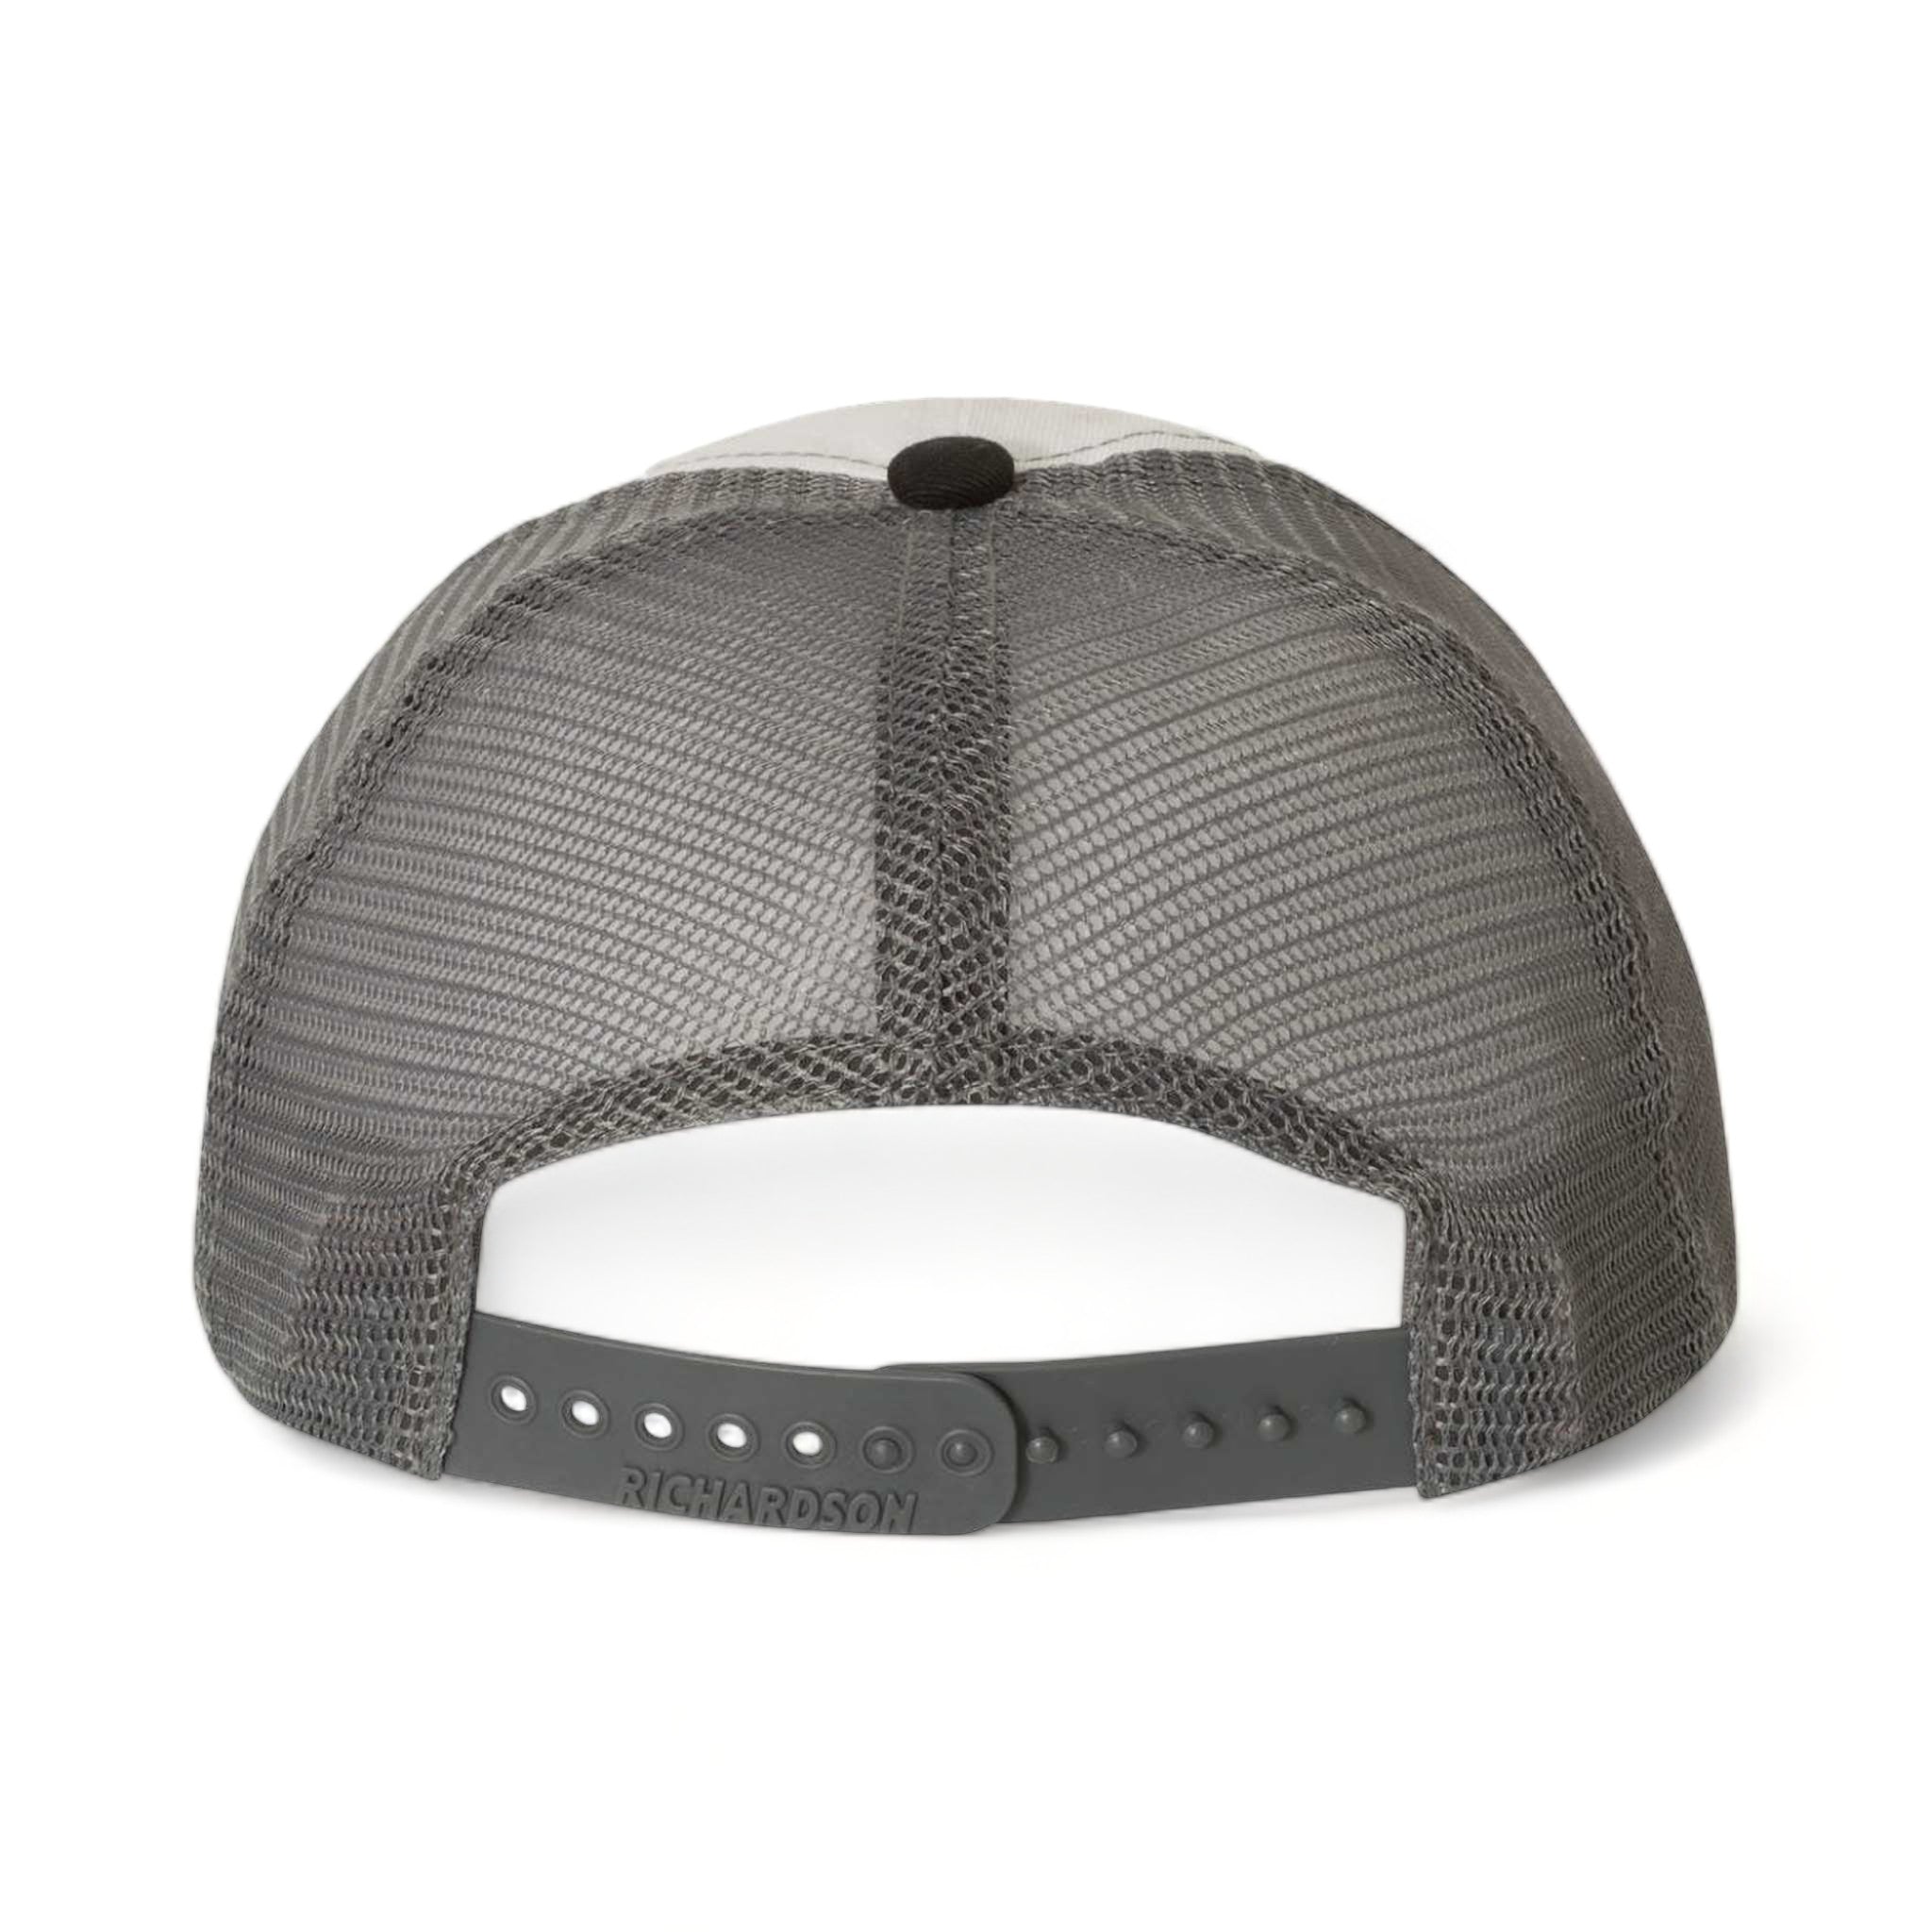 Back view of Richardson 111 custom hat in white, charcoal and black